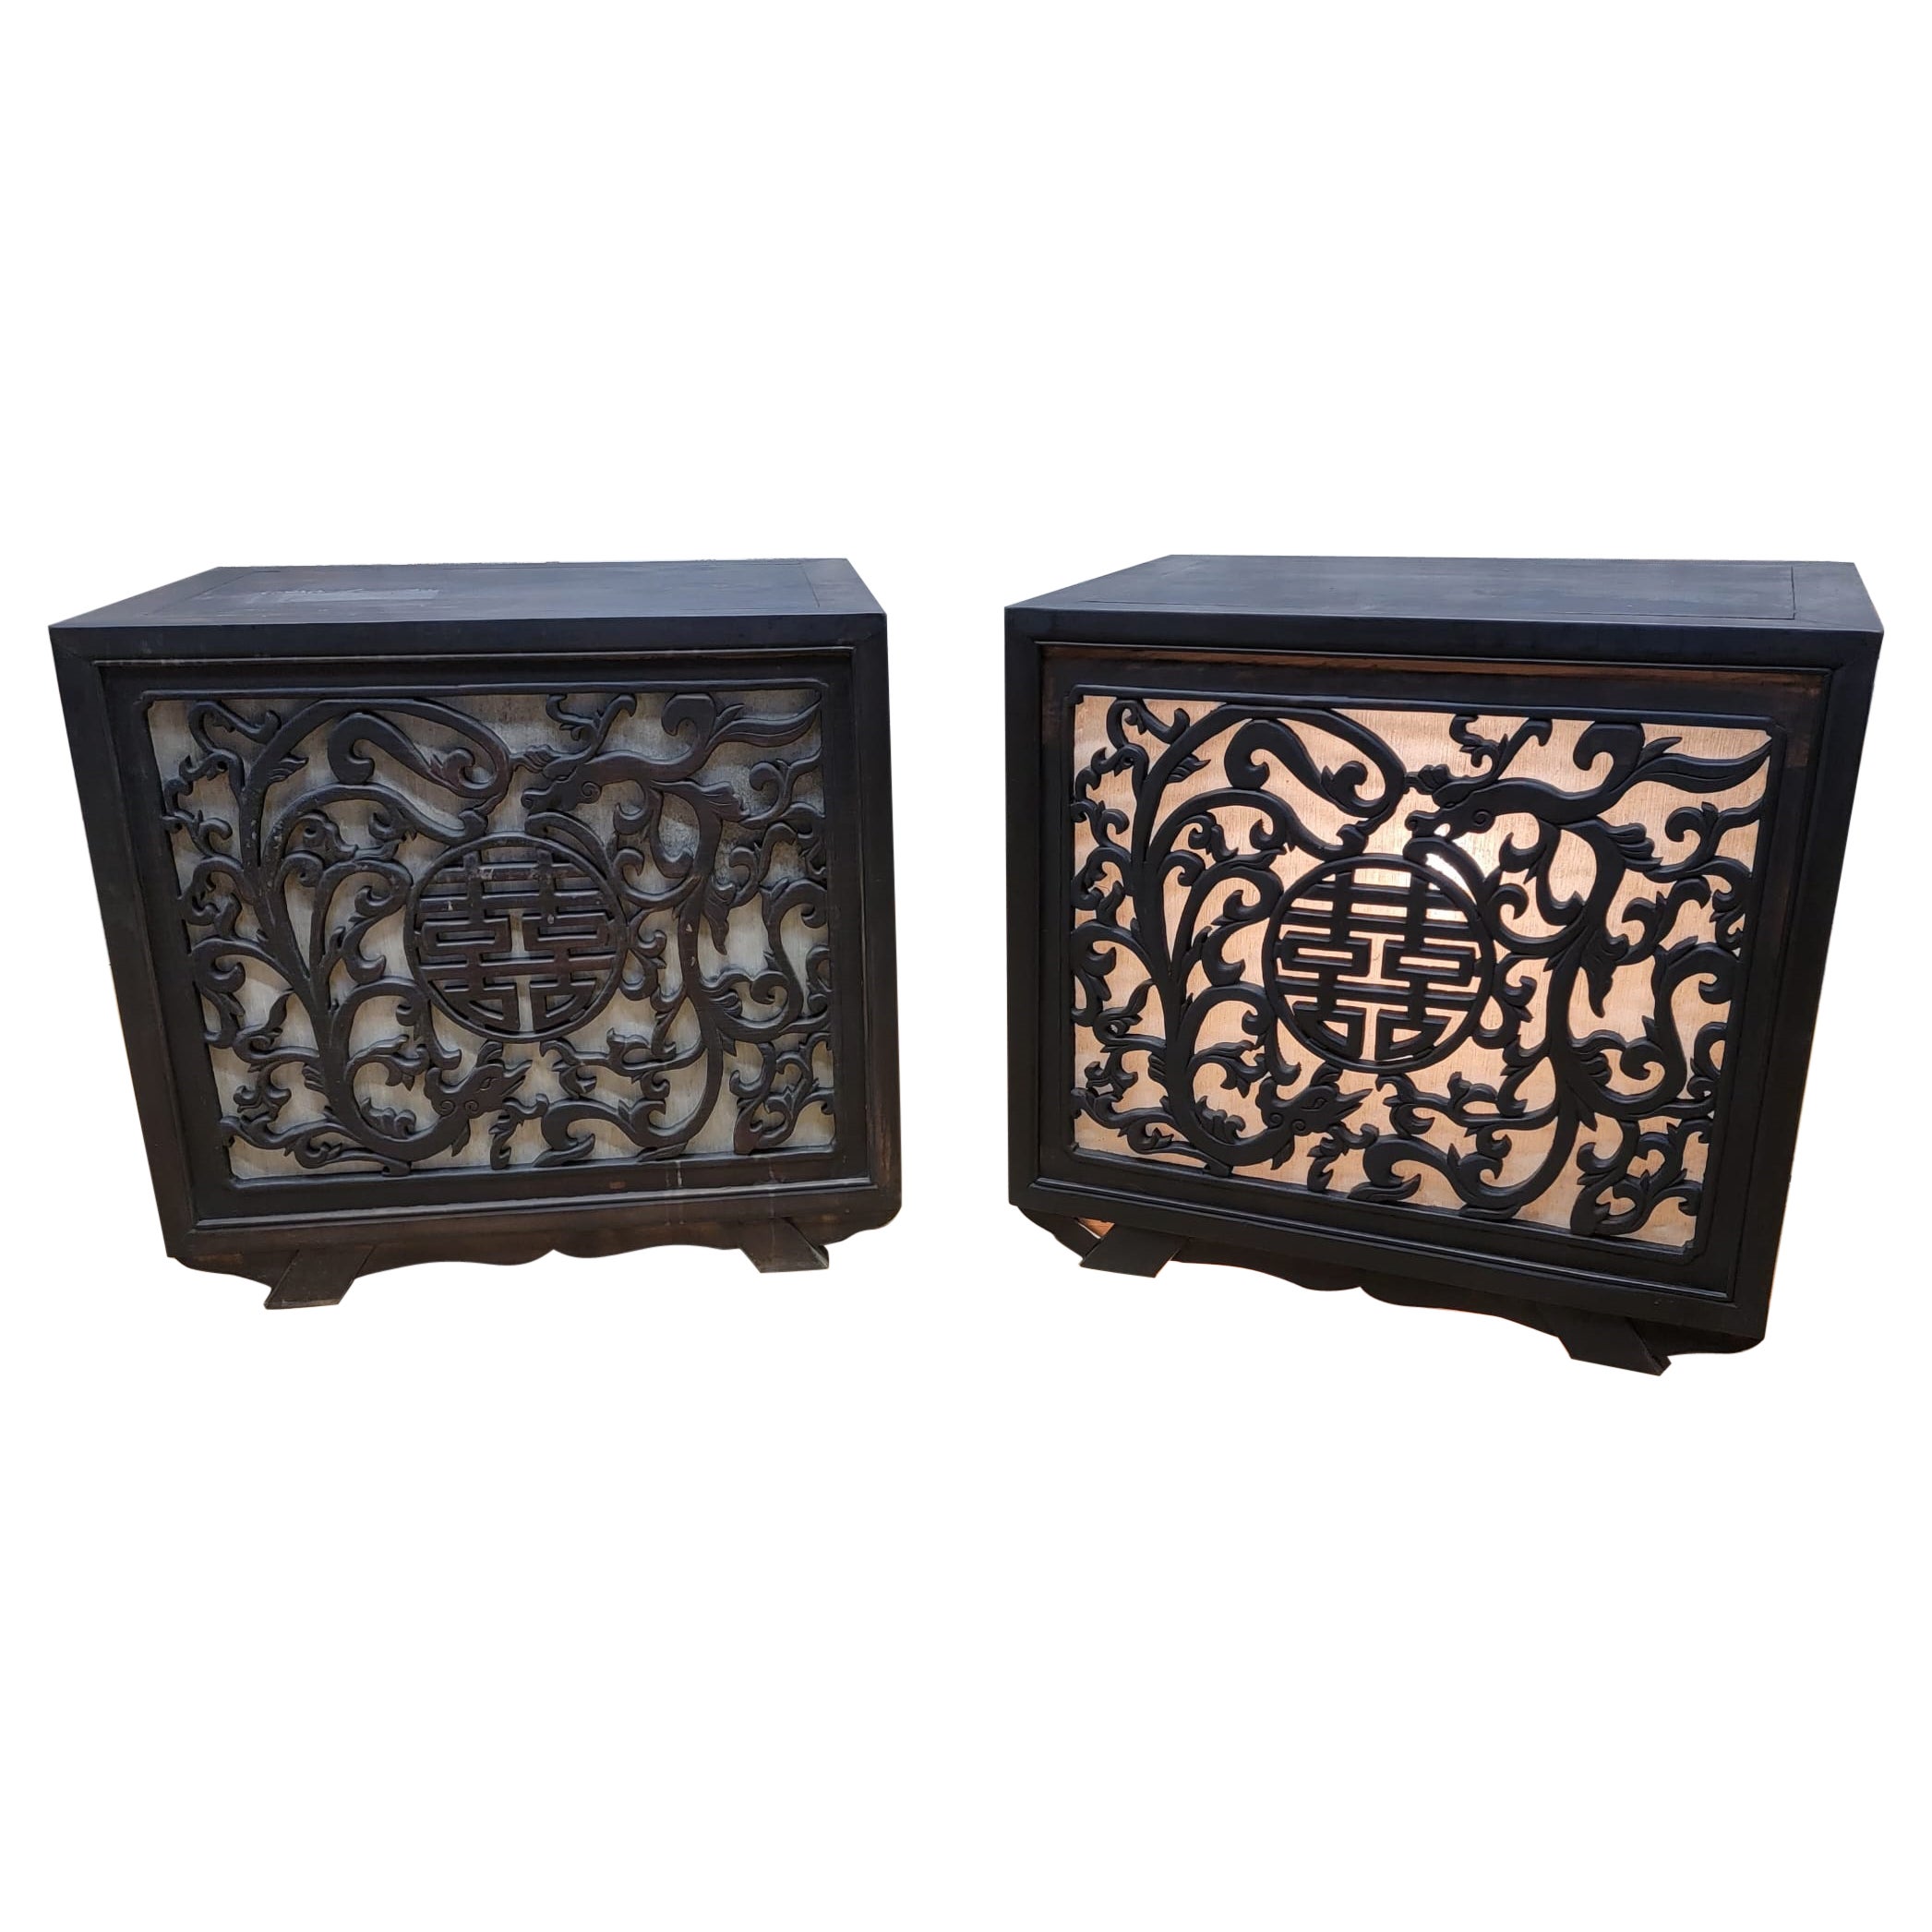 Vintage Chinese Carved Decorative Elm Side Tables with Light - Pair